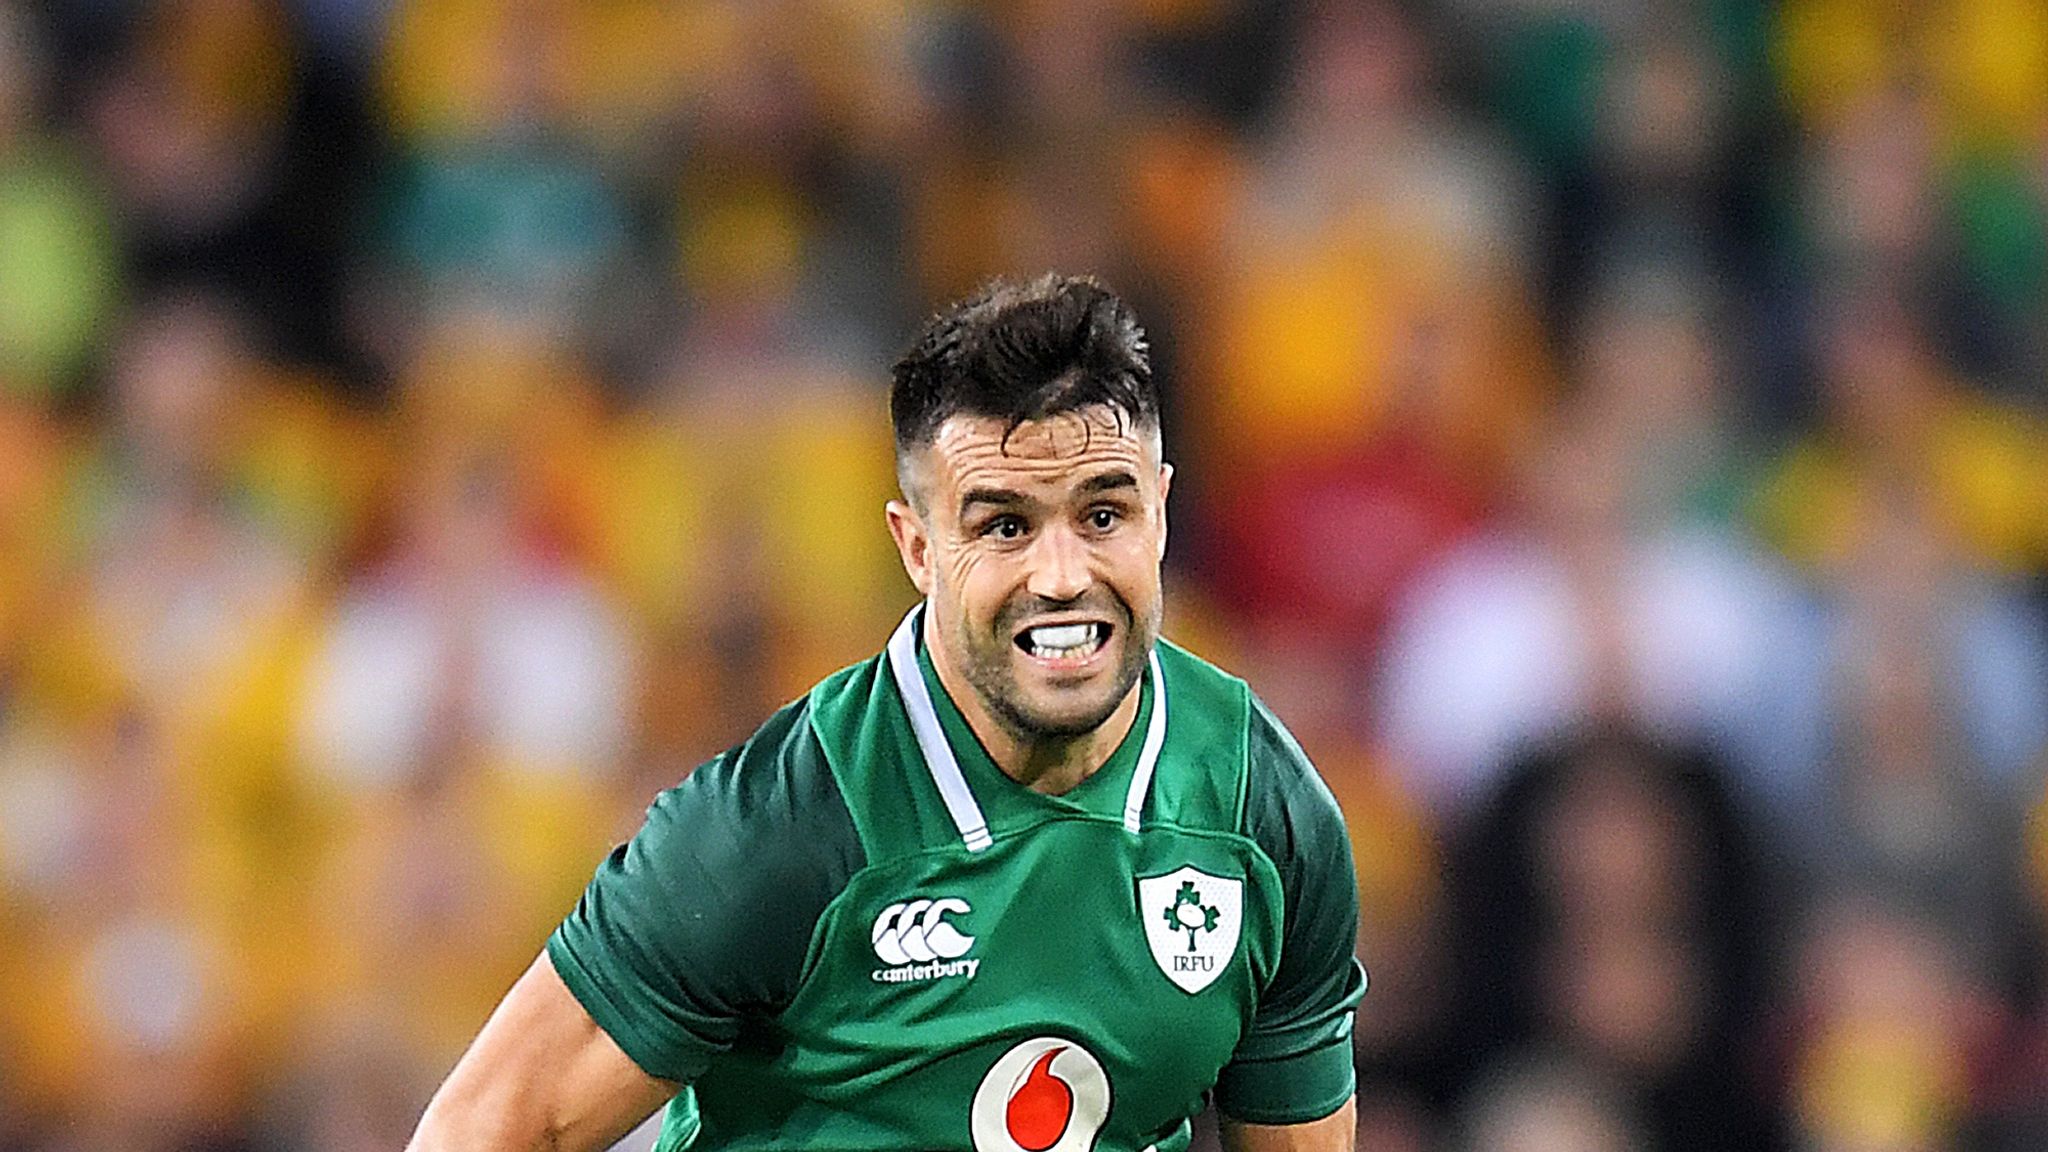 Conor Murray had no hesitations signing a new contract with Munster and Ireland Rugby Union News Sky Sports